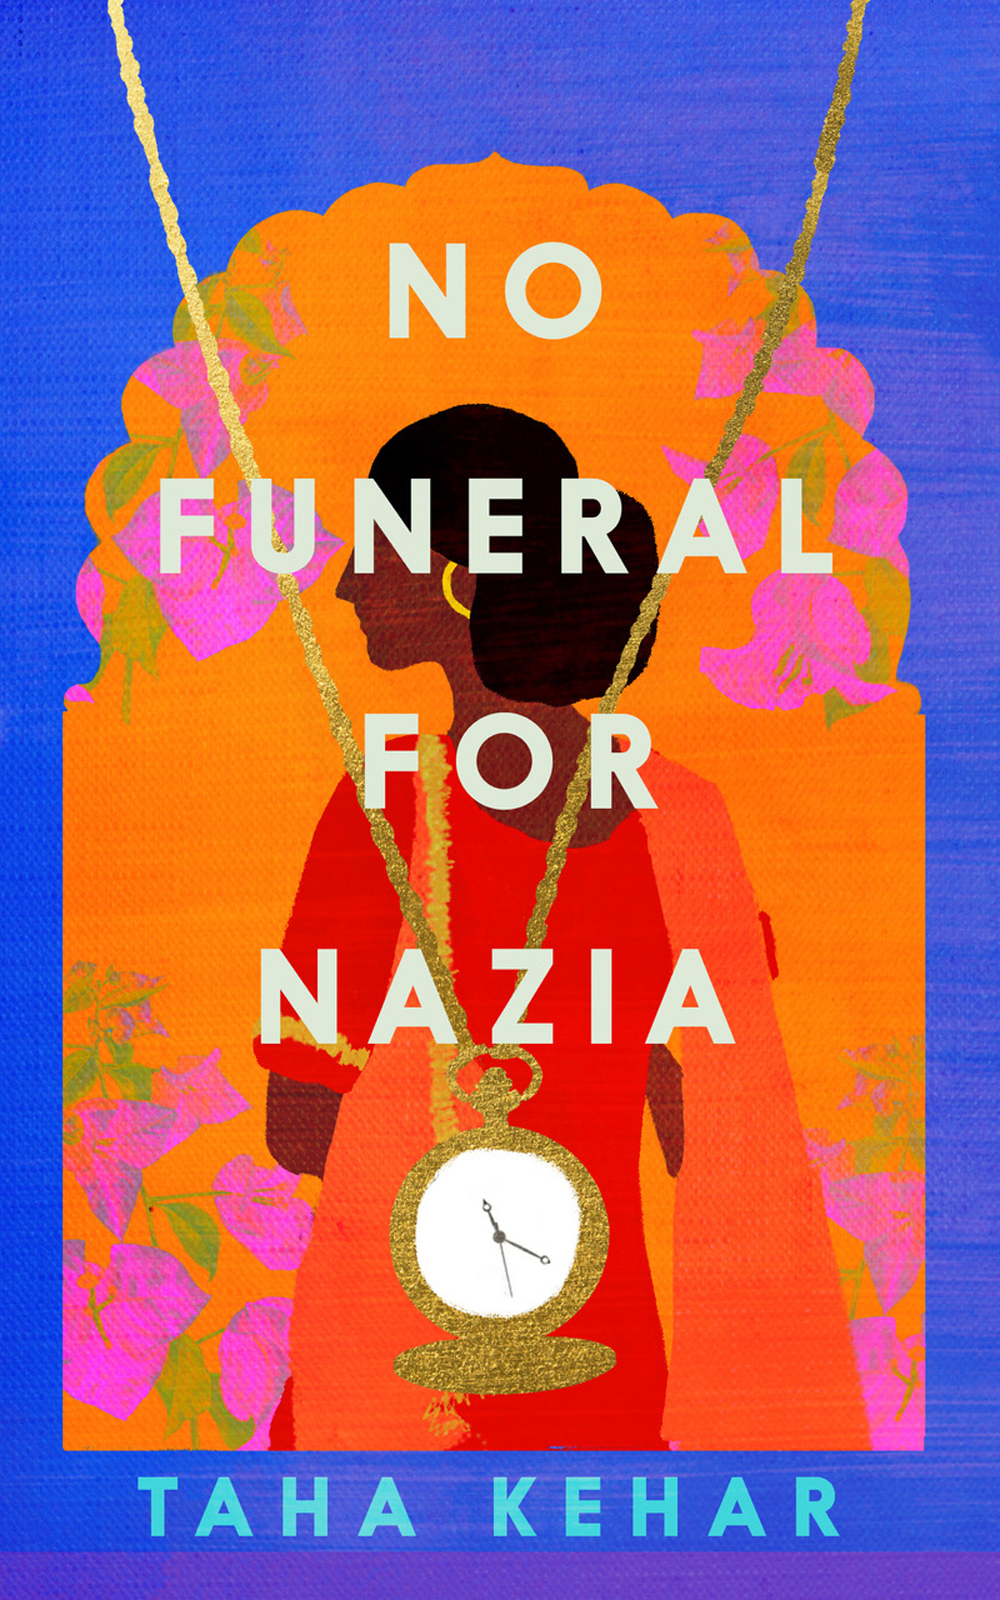 No Funeral for Nazia by Taha Kehar